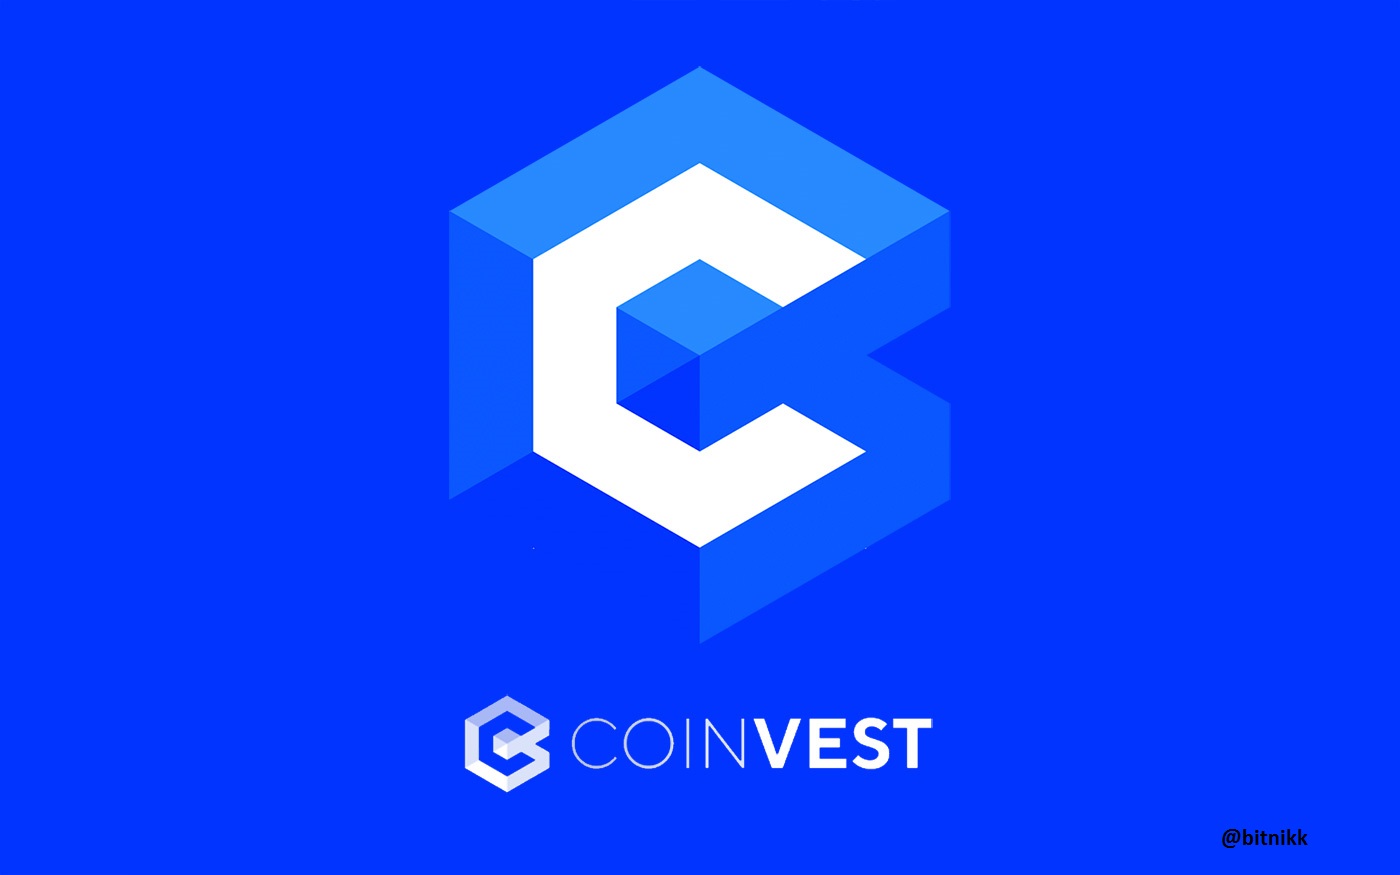 coinvest-ico.jpg